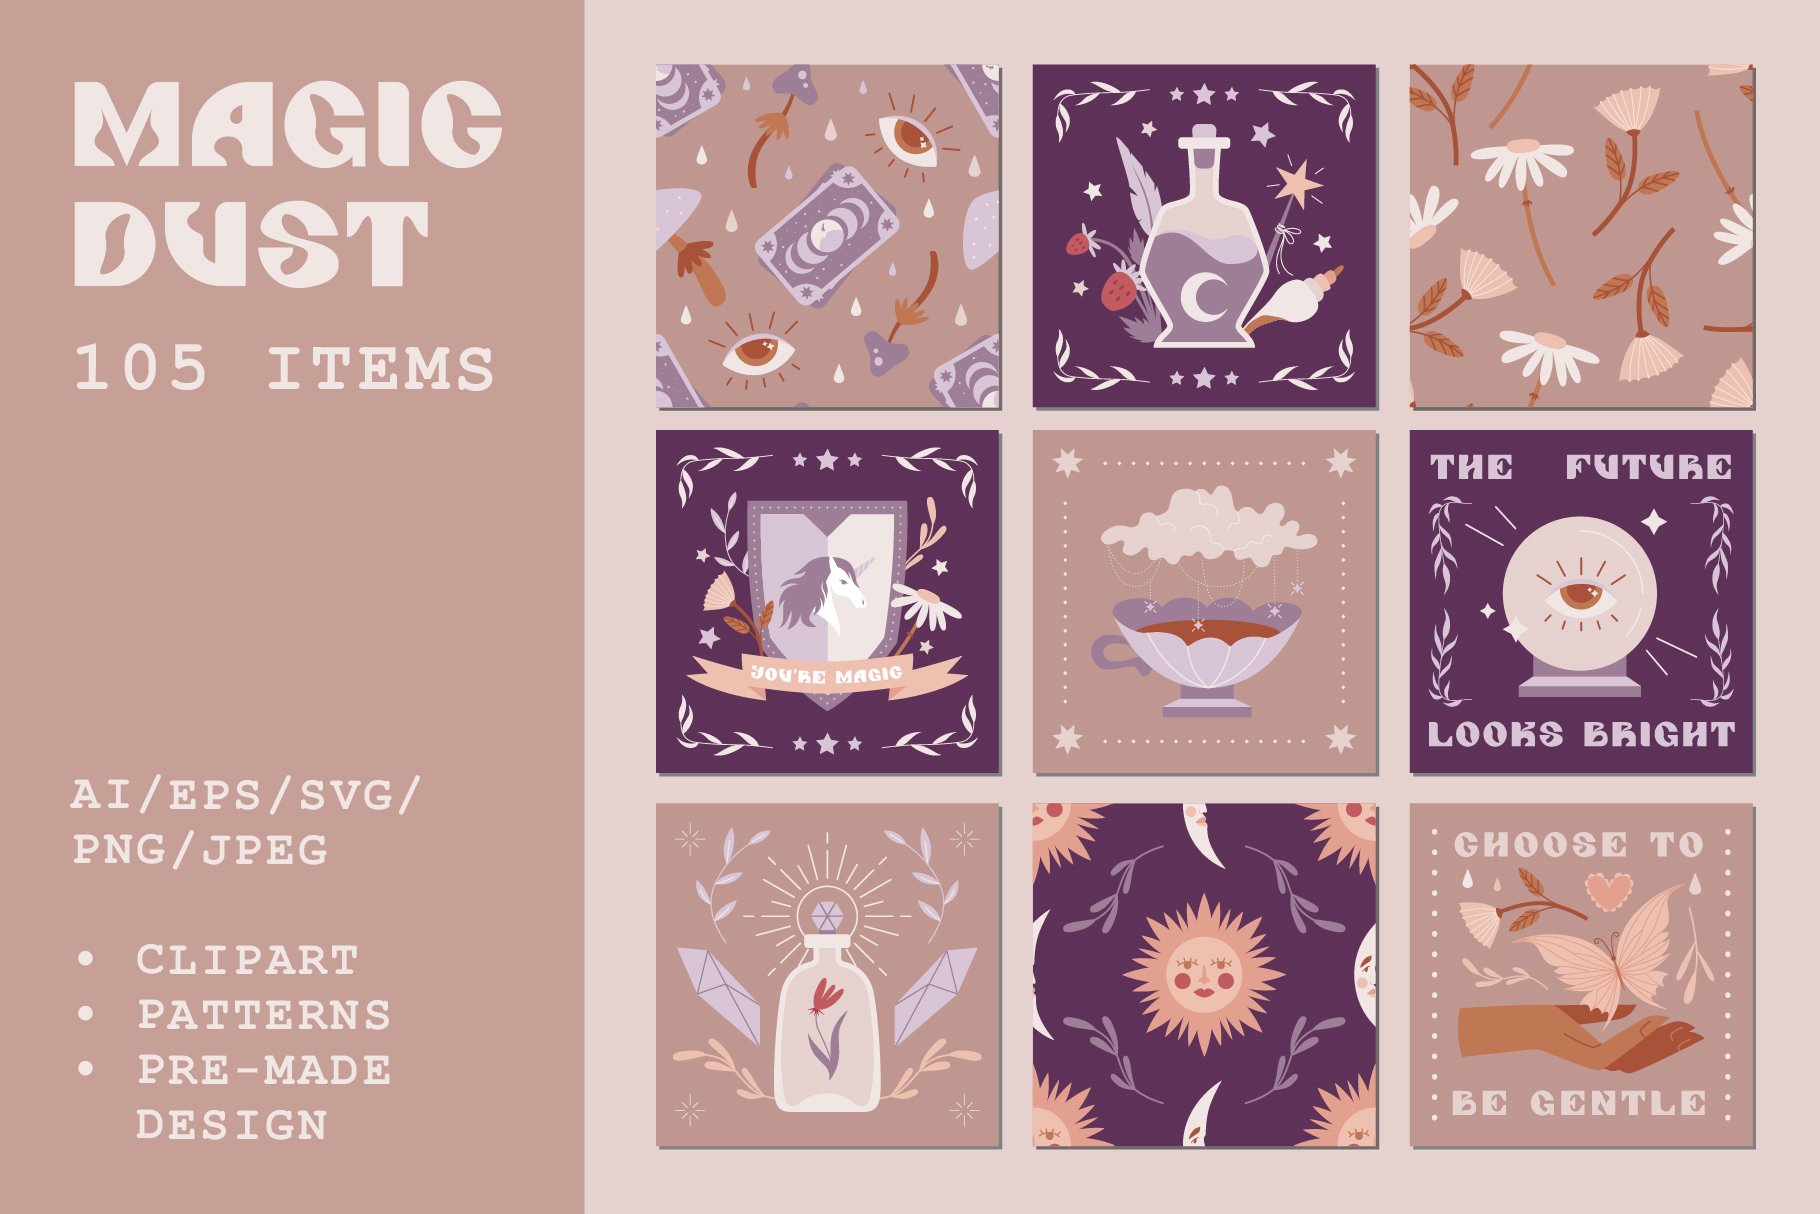 Magic Dust | Clipart + Patterns cover image.